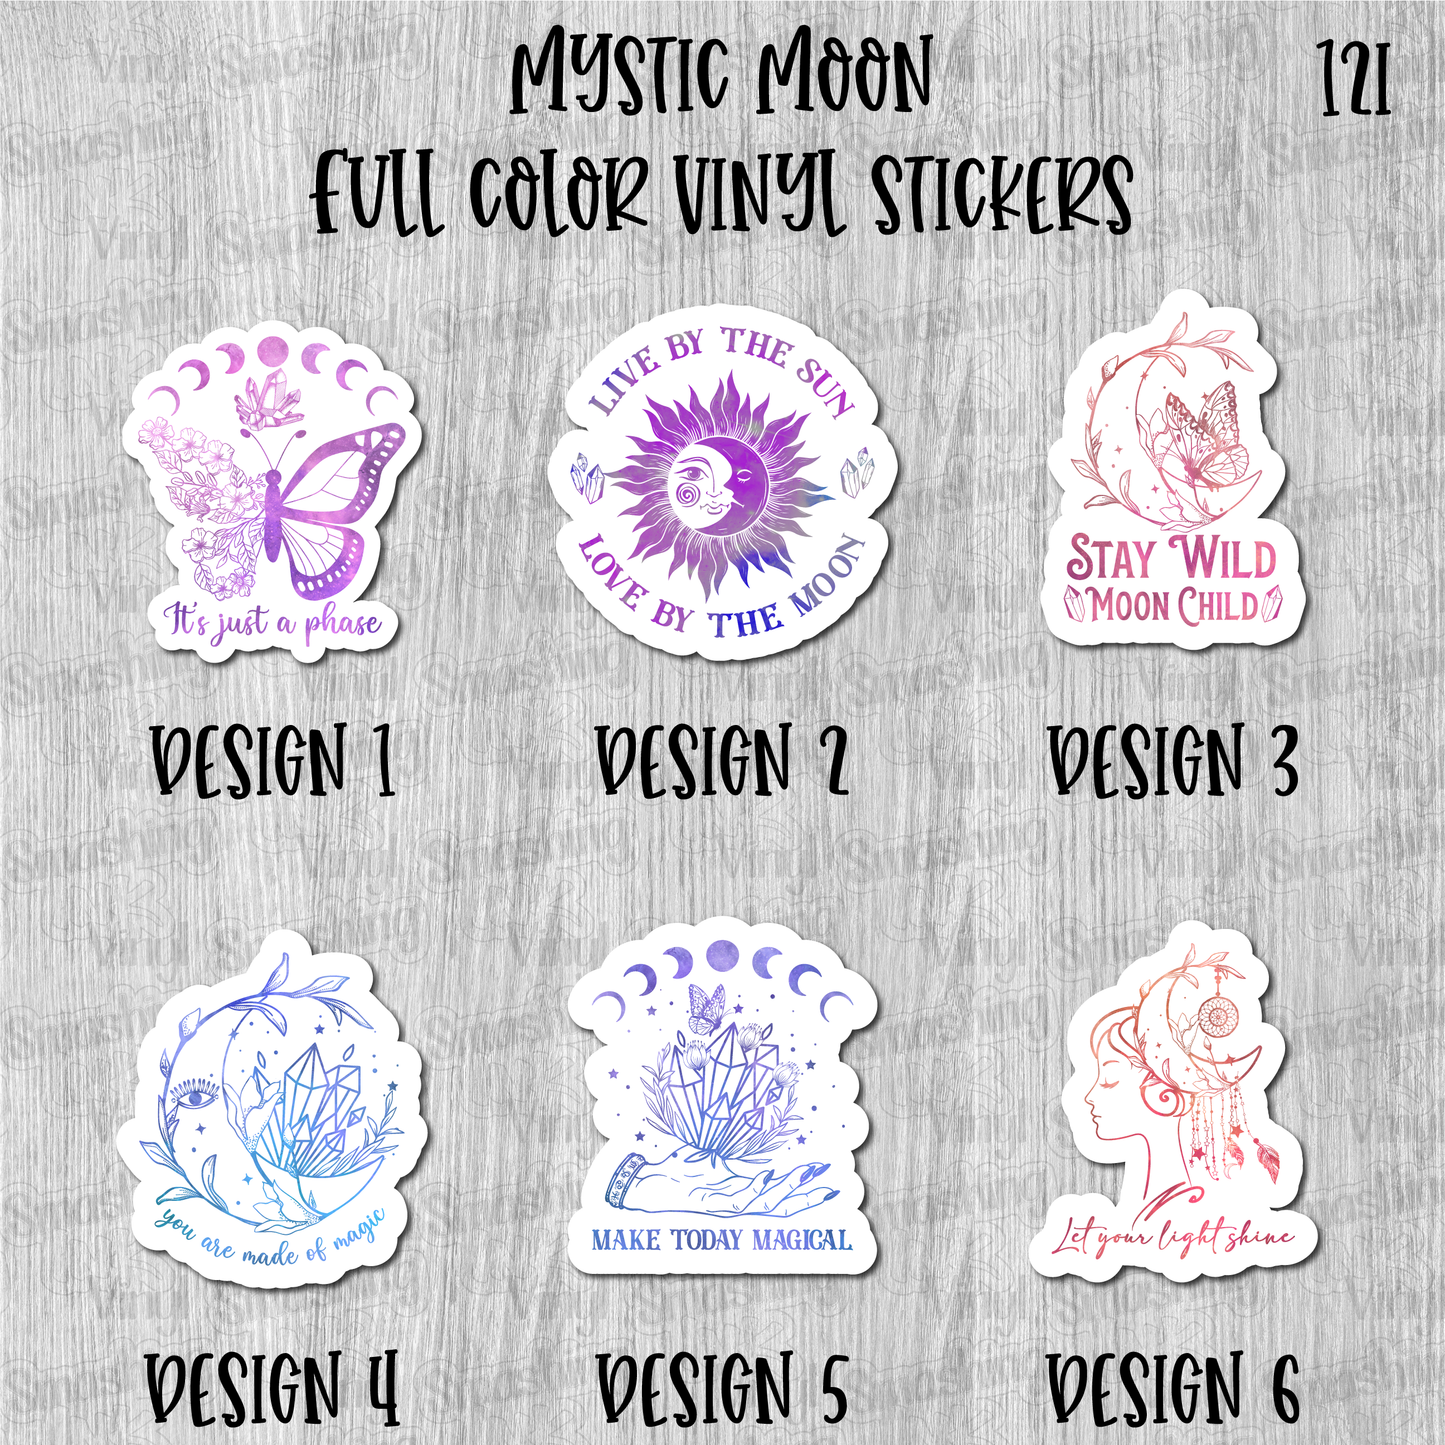 Mystic Moon - Full Color Vinyl Stickers (SHIPS IN 3-7 BUS DAYS)